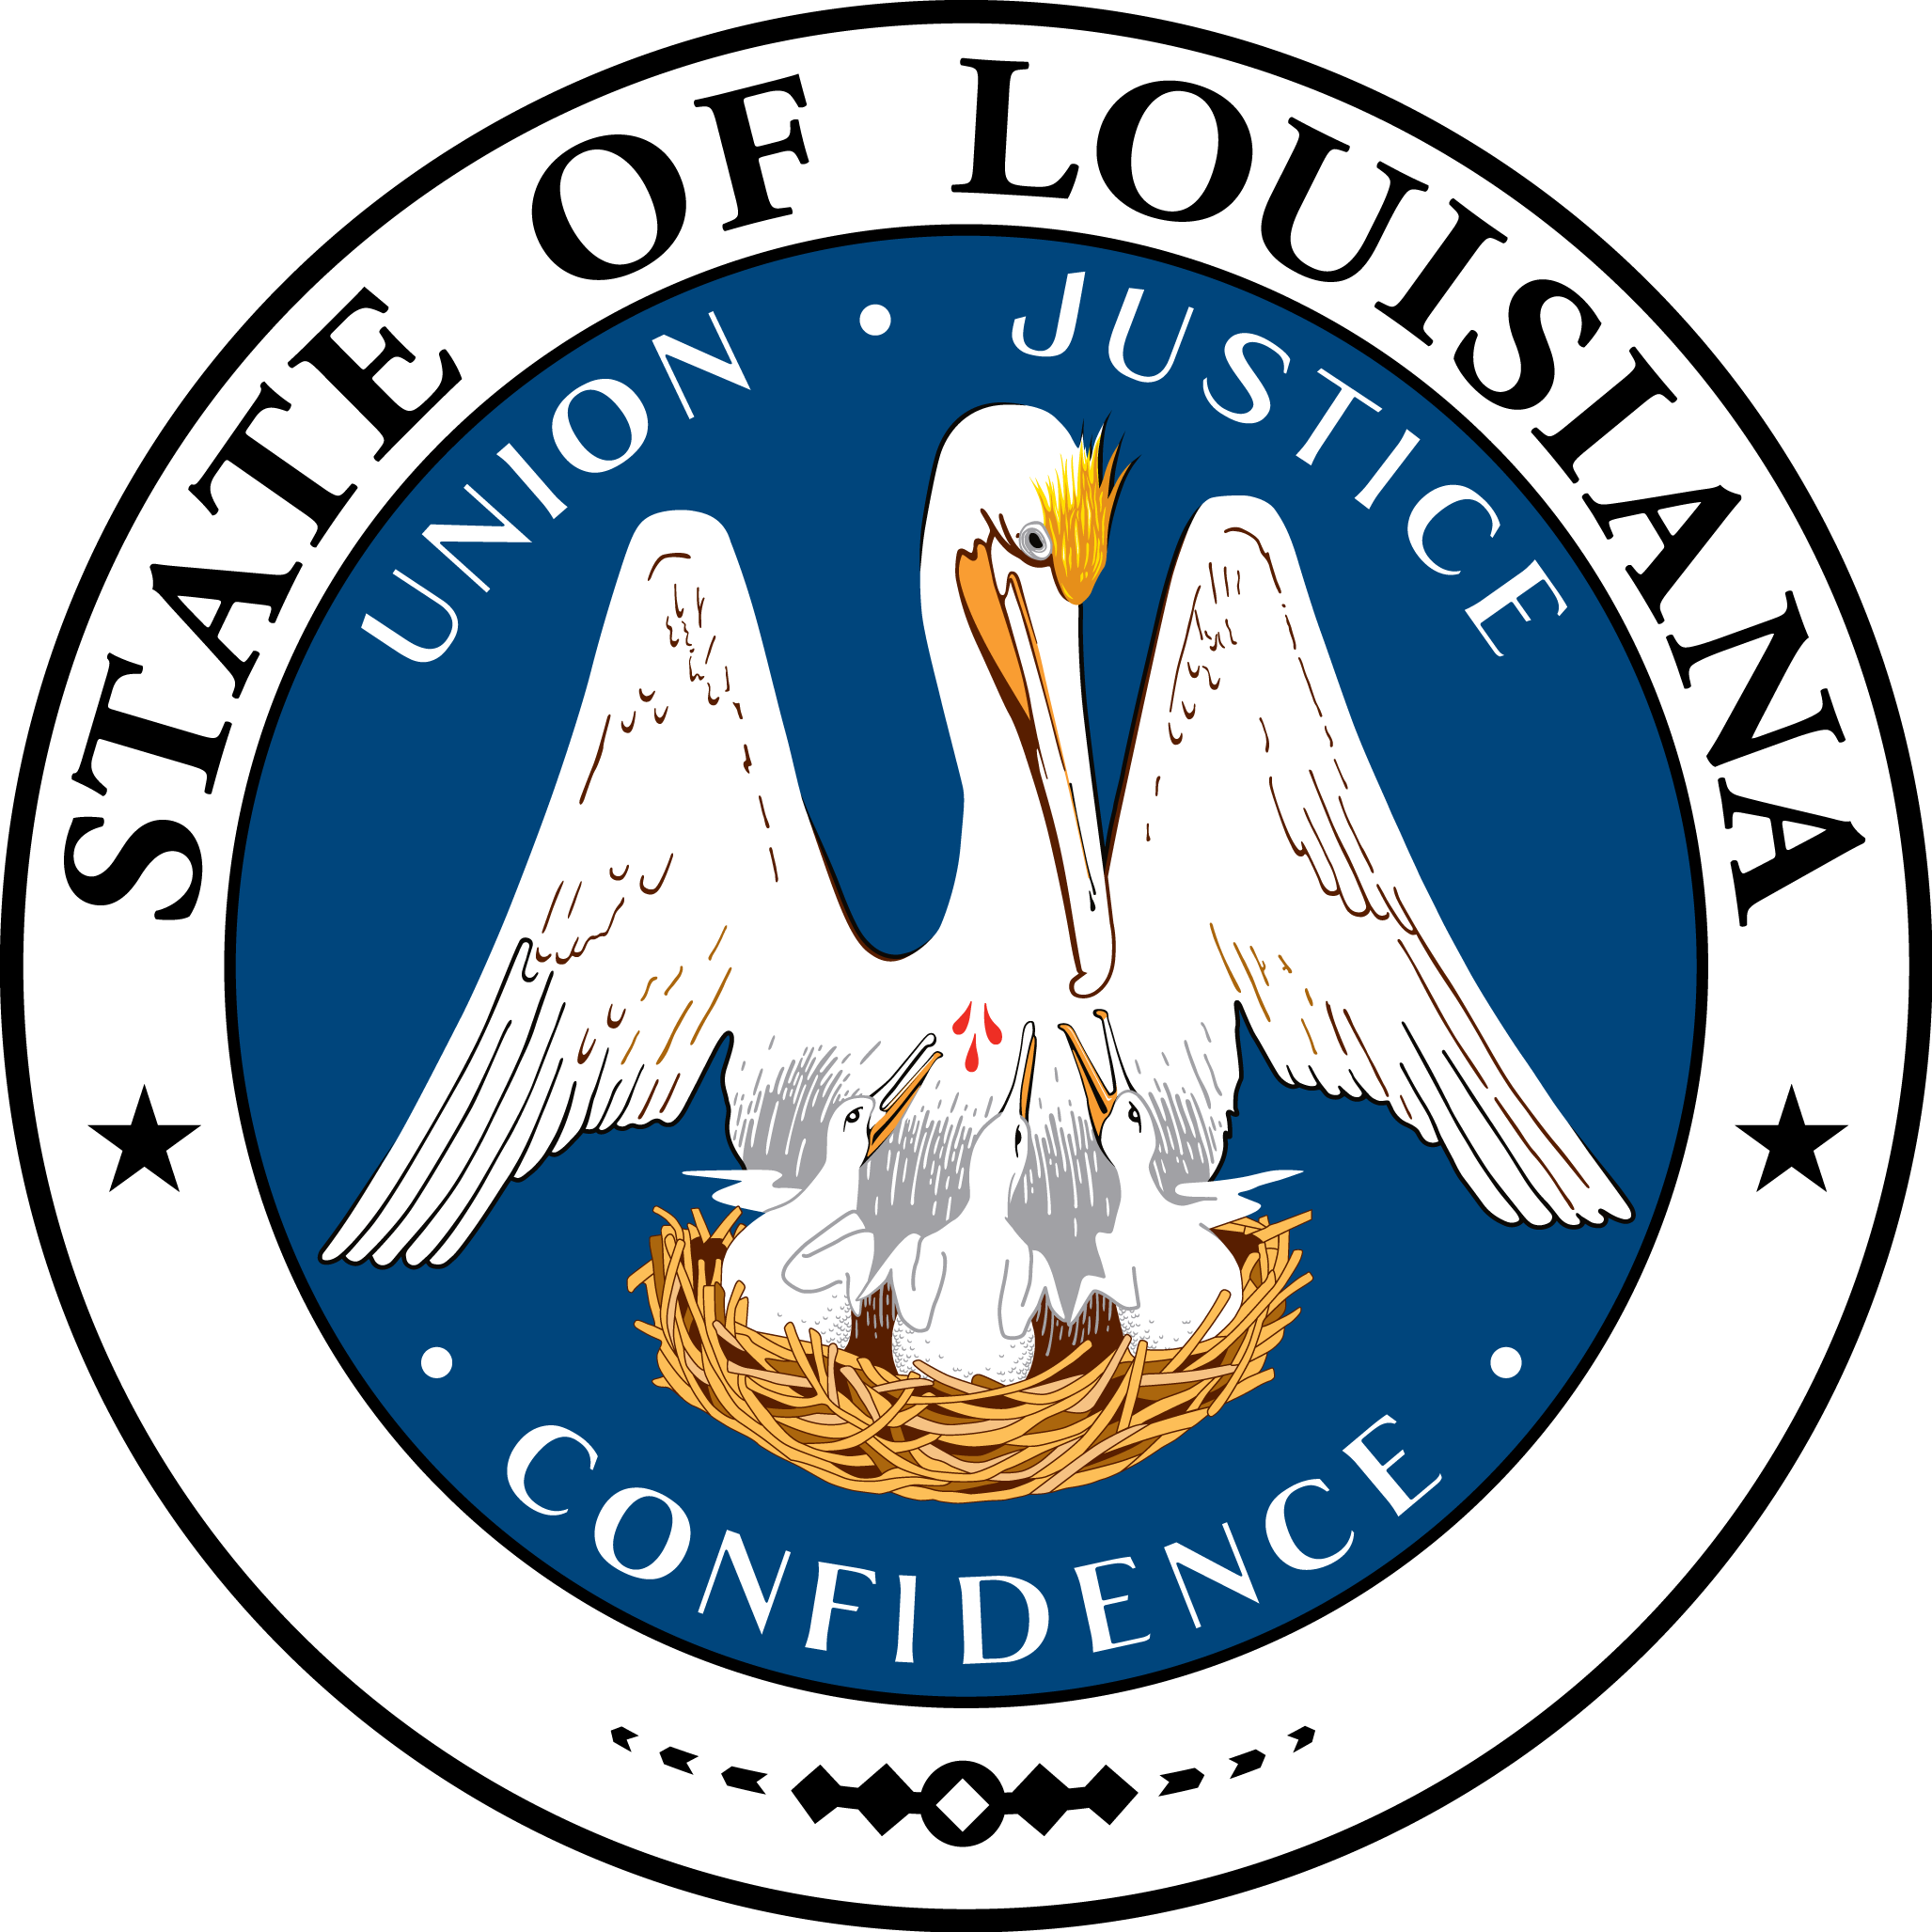 State Symbols - The official website of Louisiana